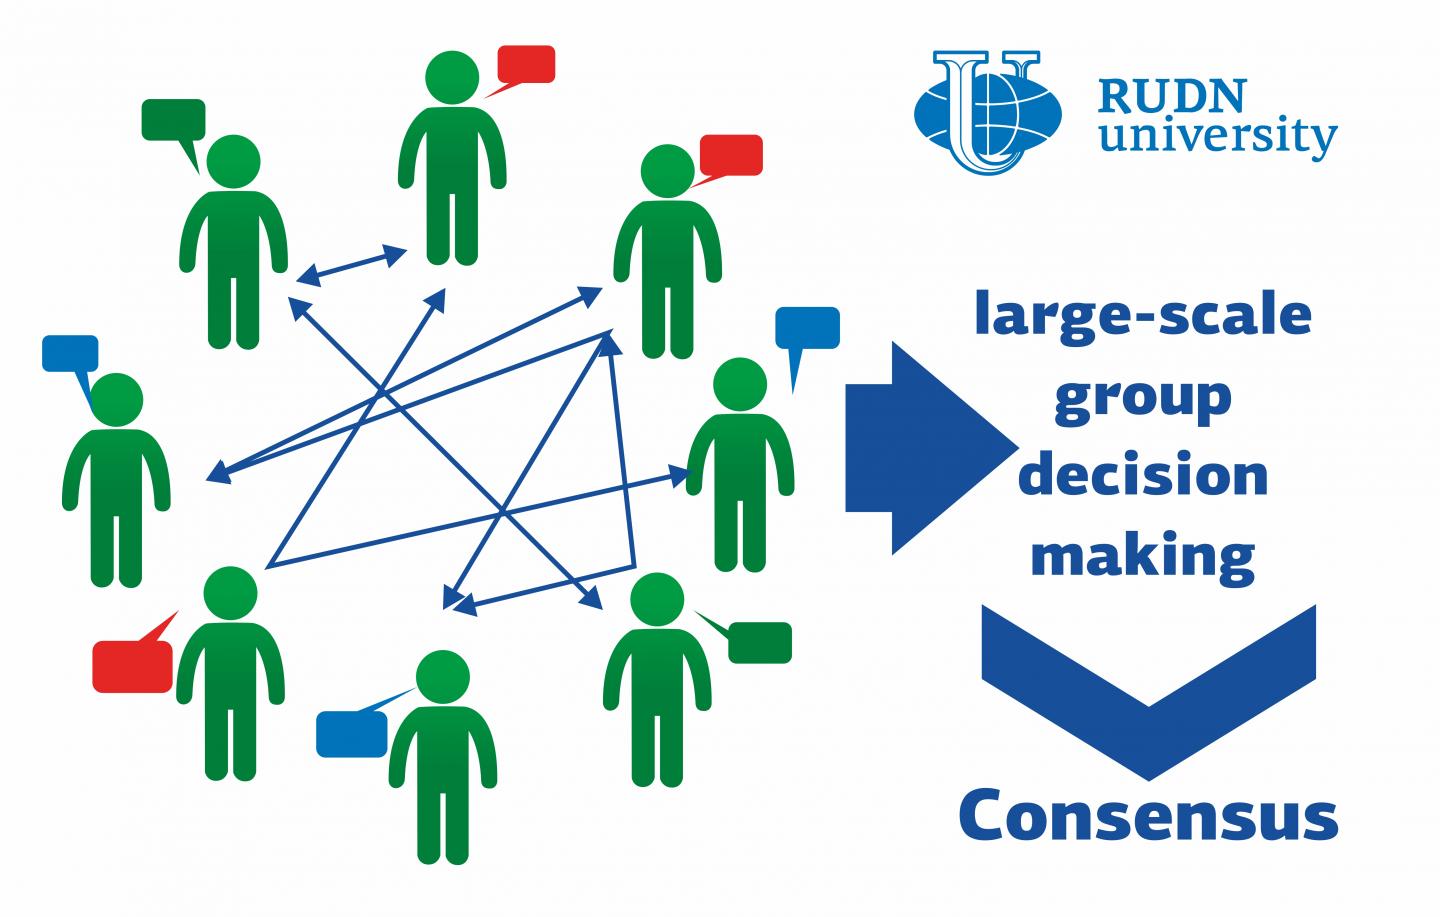 RUDN University research team of mathematicians Suggested a New Decision Making Algorithm